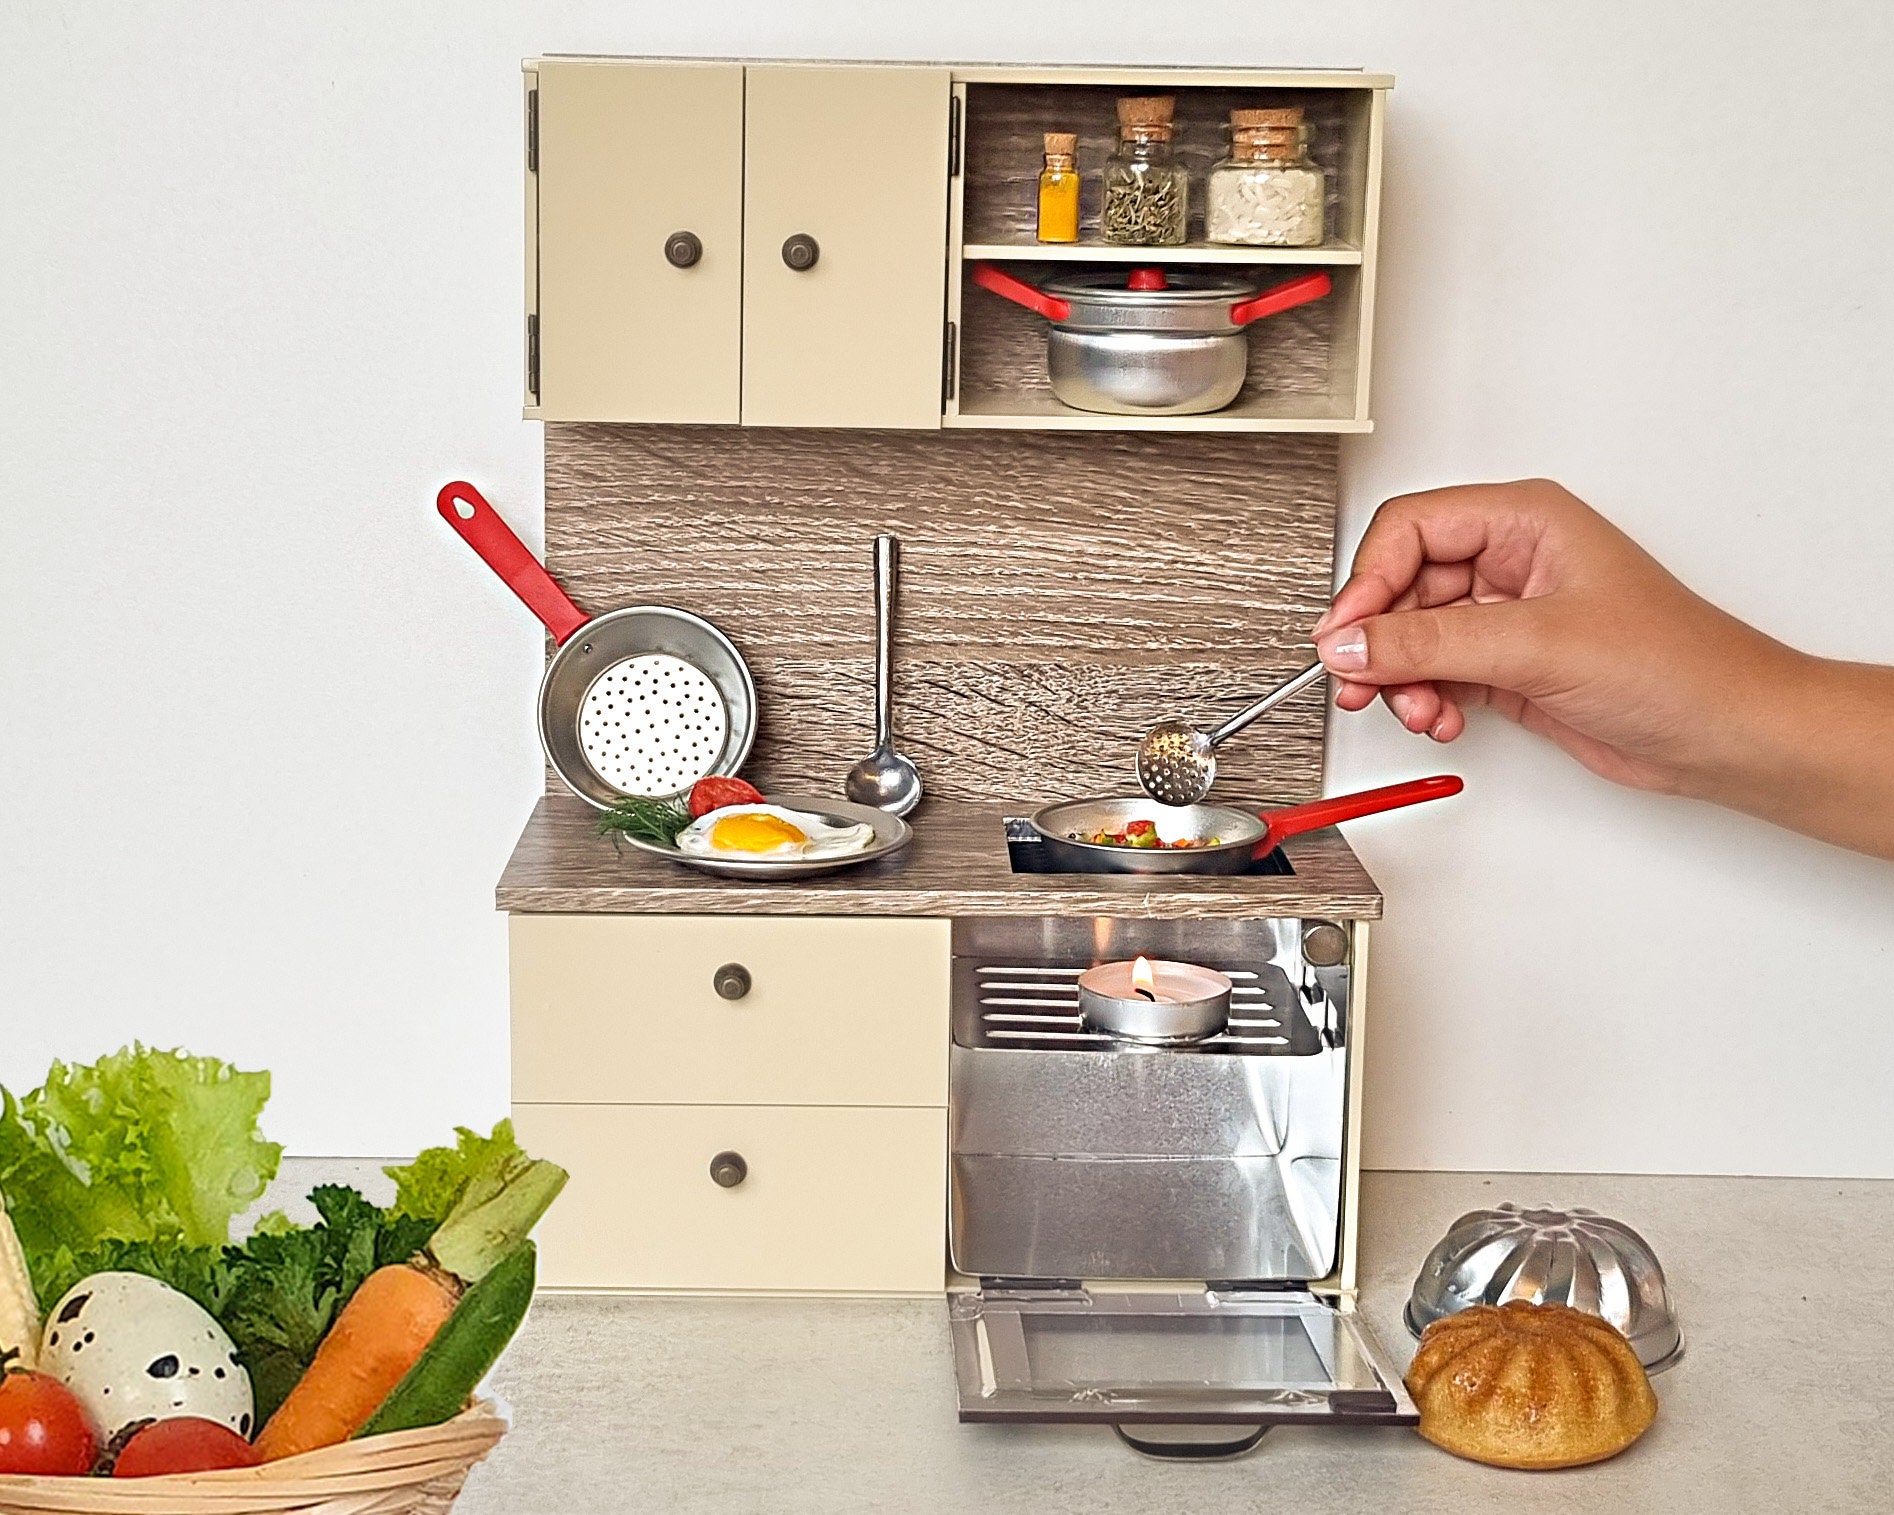 Miniature whisk : cook real mini food